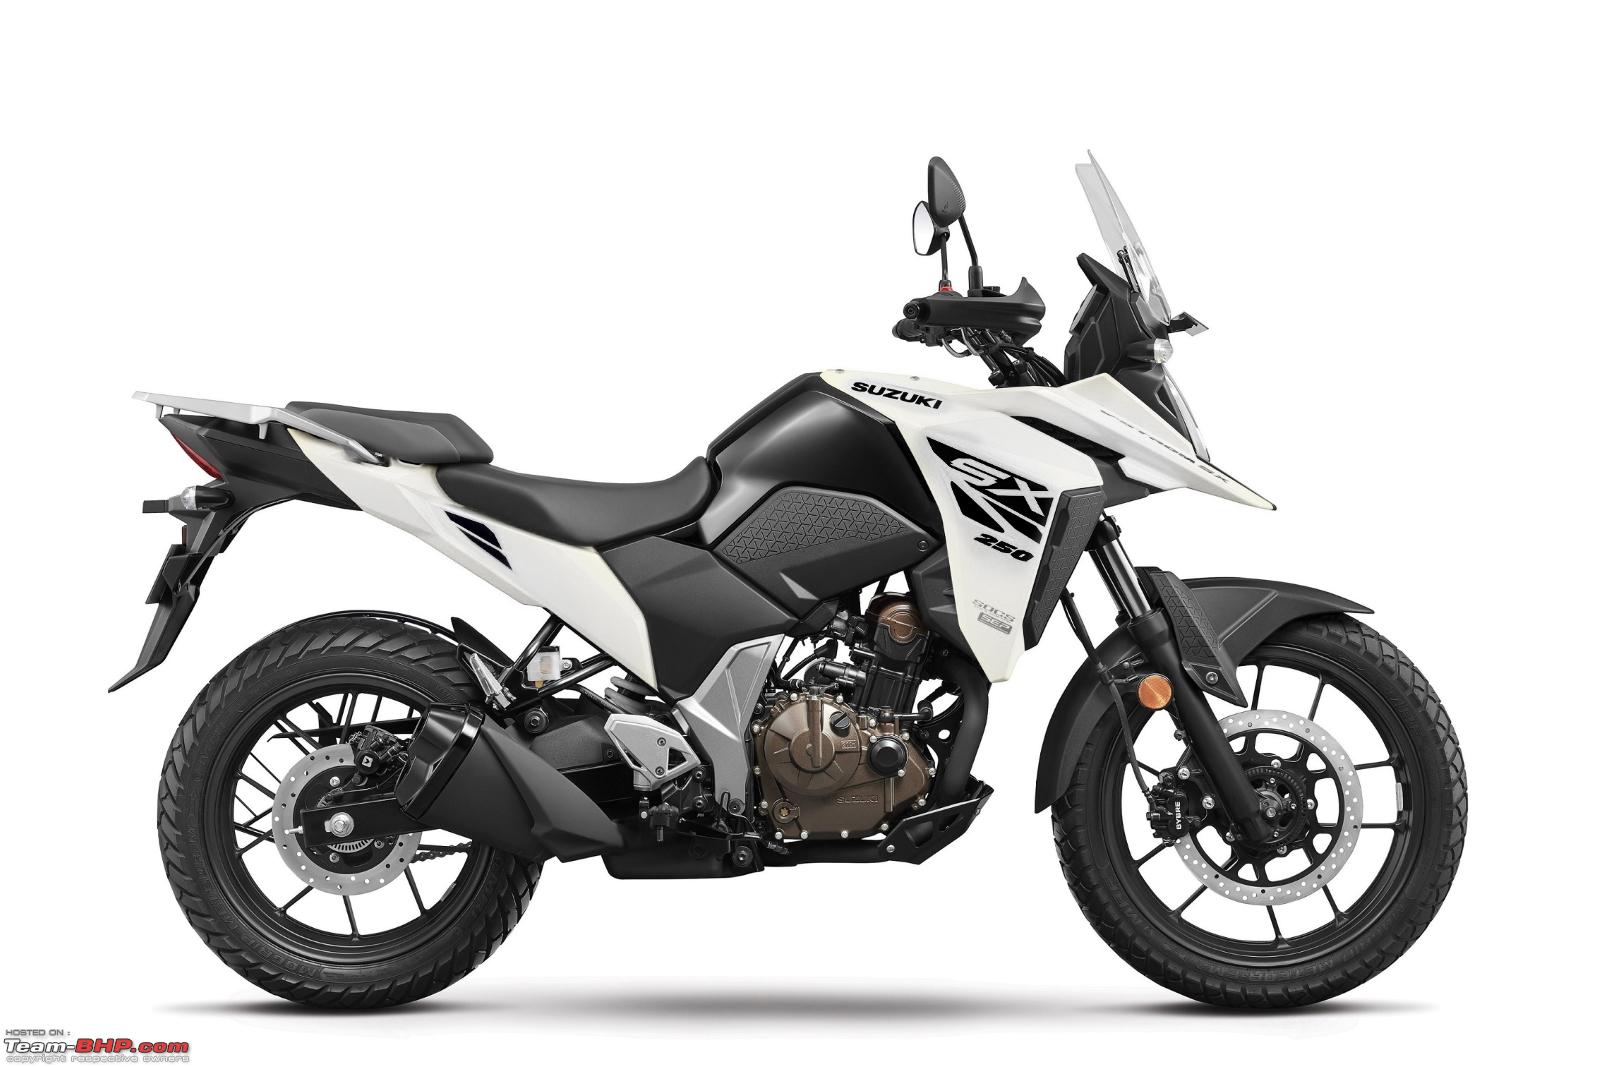 Suzuki V-Strom 250 SX, now launched at Rs. 2.12 lakhs - Page 4 - Team-BHP